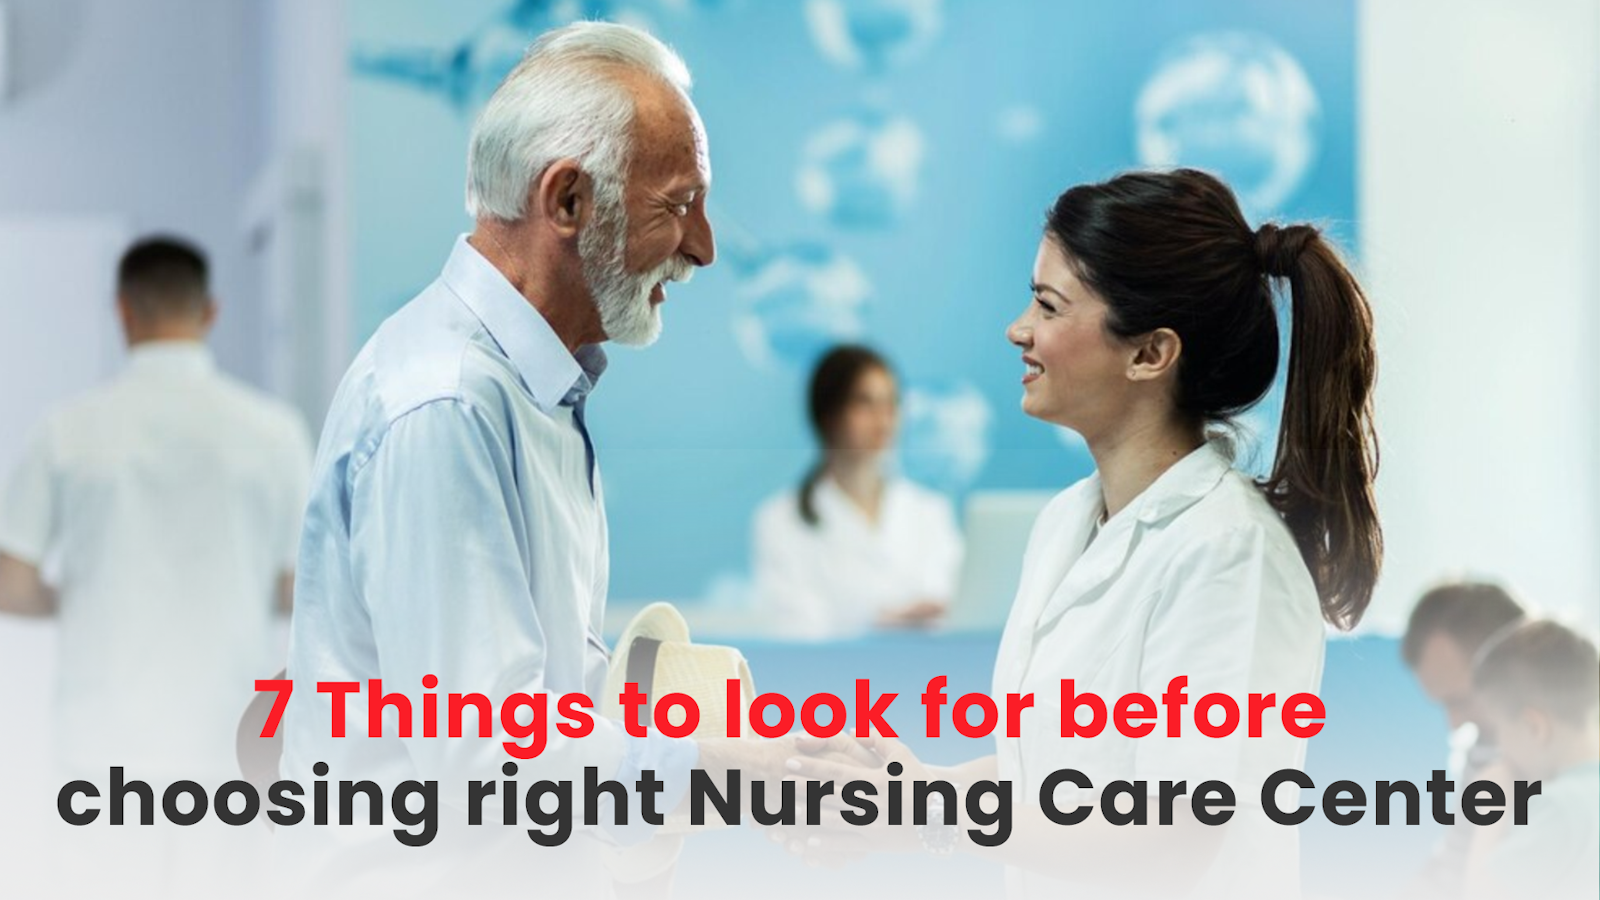 7 Things to look for before choosing right Nursing Care Center